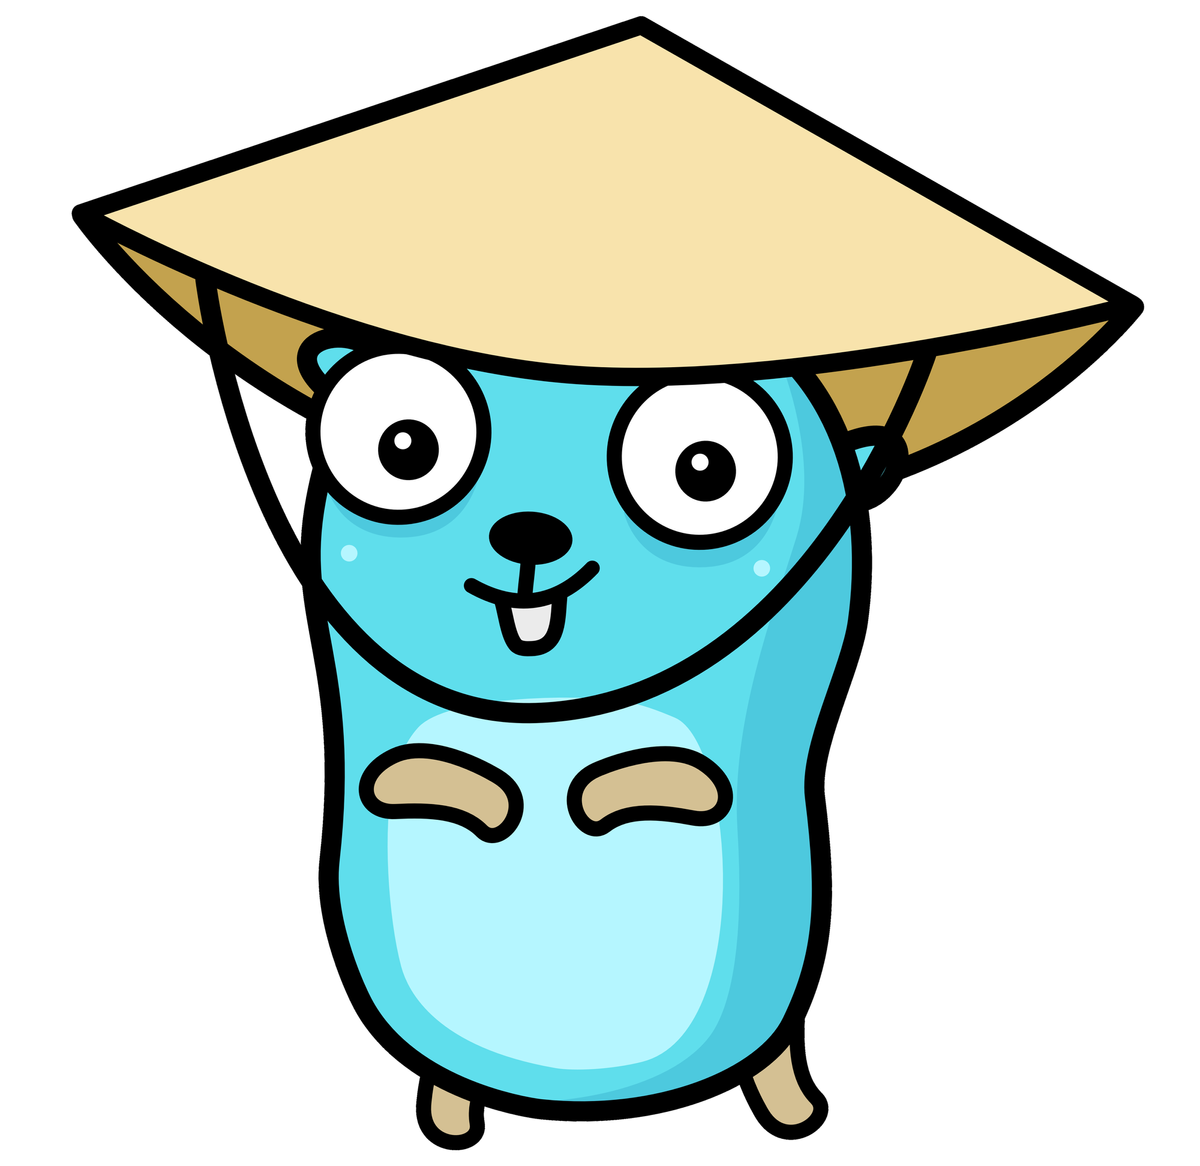 I switched to Golang.